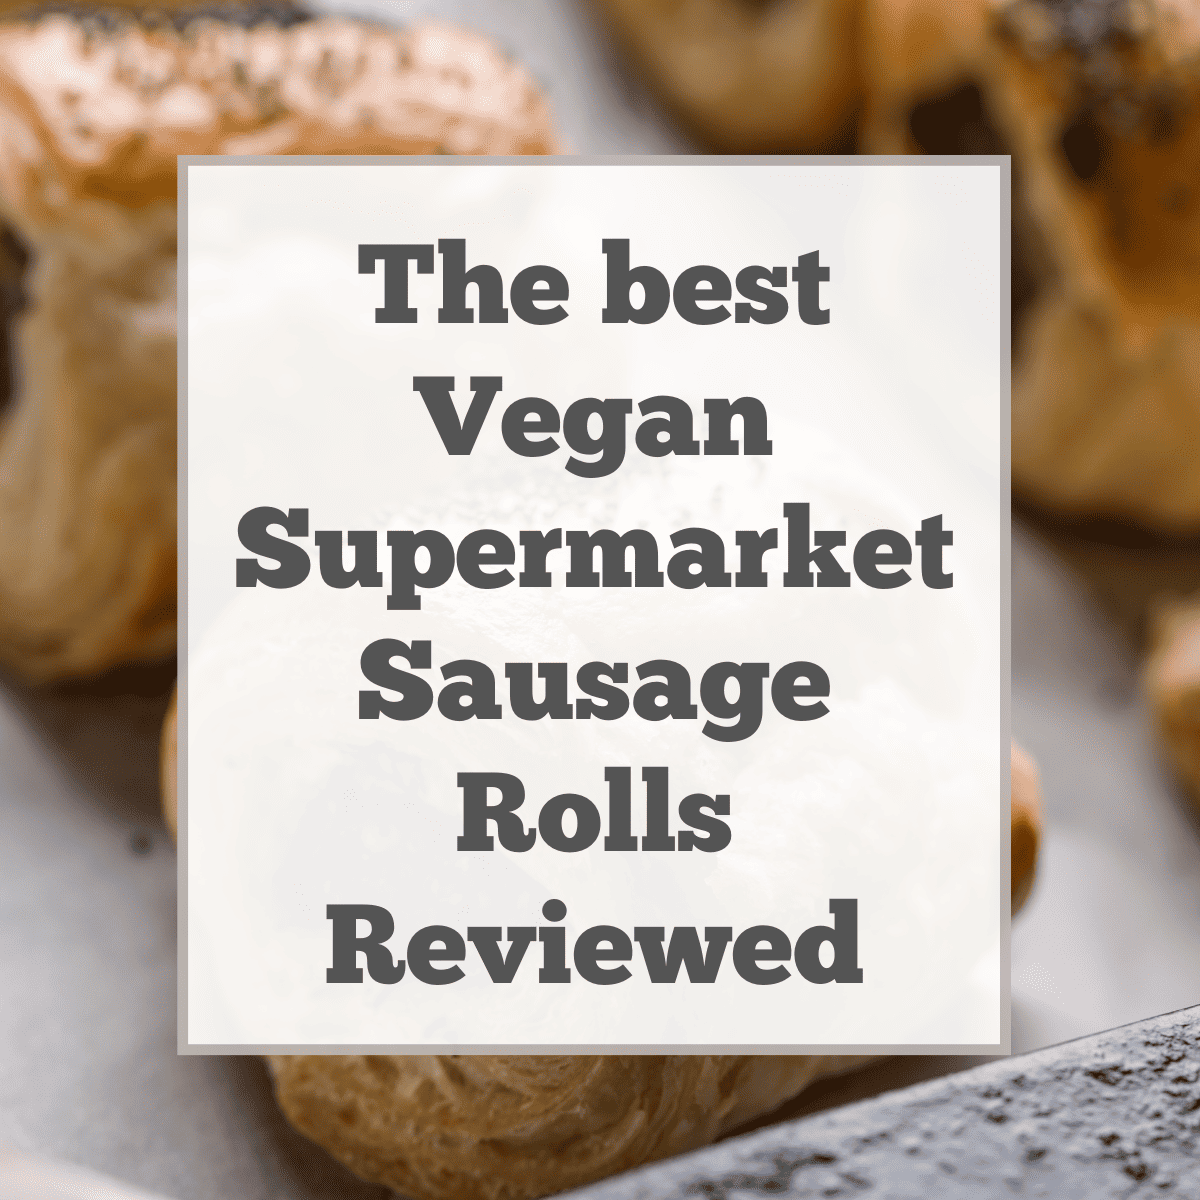 A Review of the Best Vegan Supermarket  Sausage Rolls